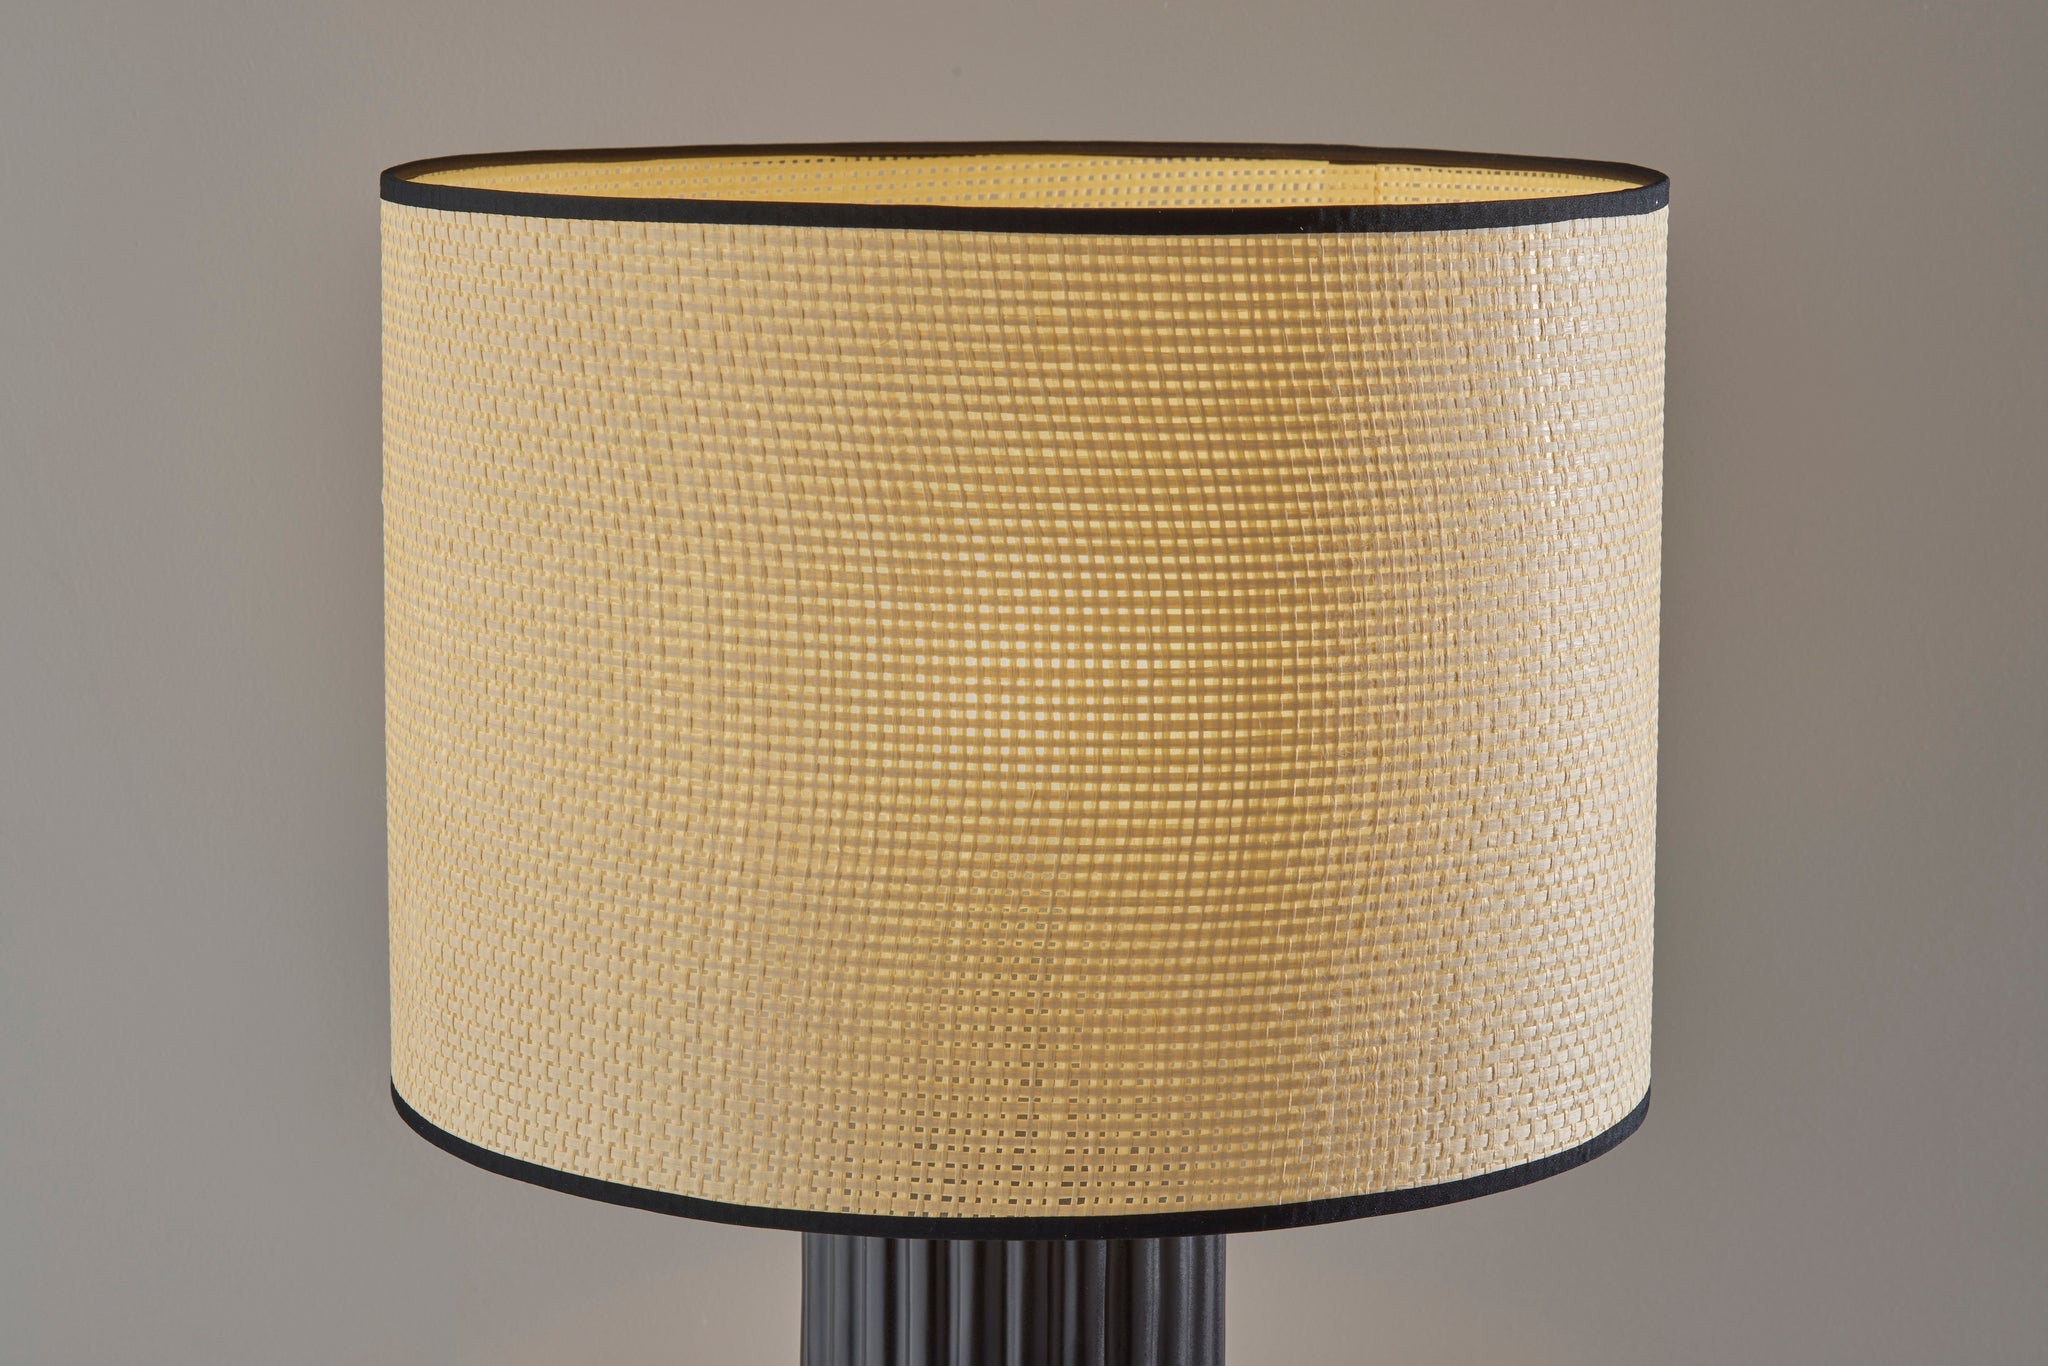 29" Black Ceramic Cylinder Table Lamp With Beige Drum Shade